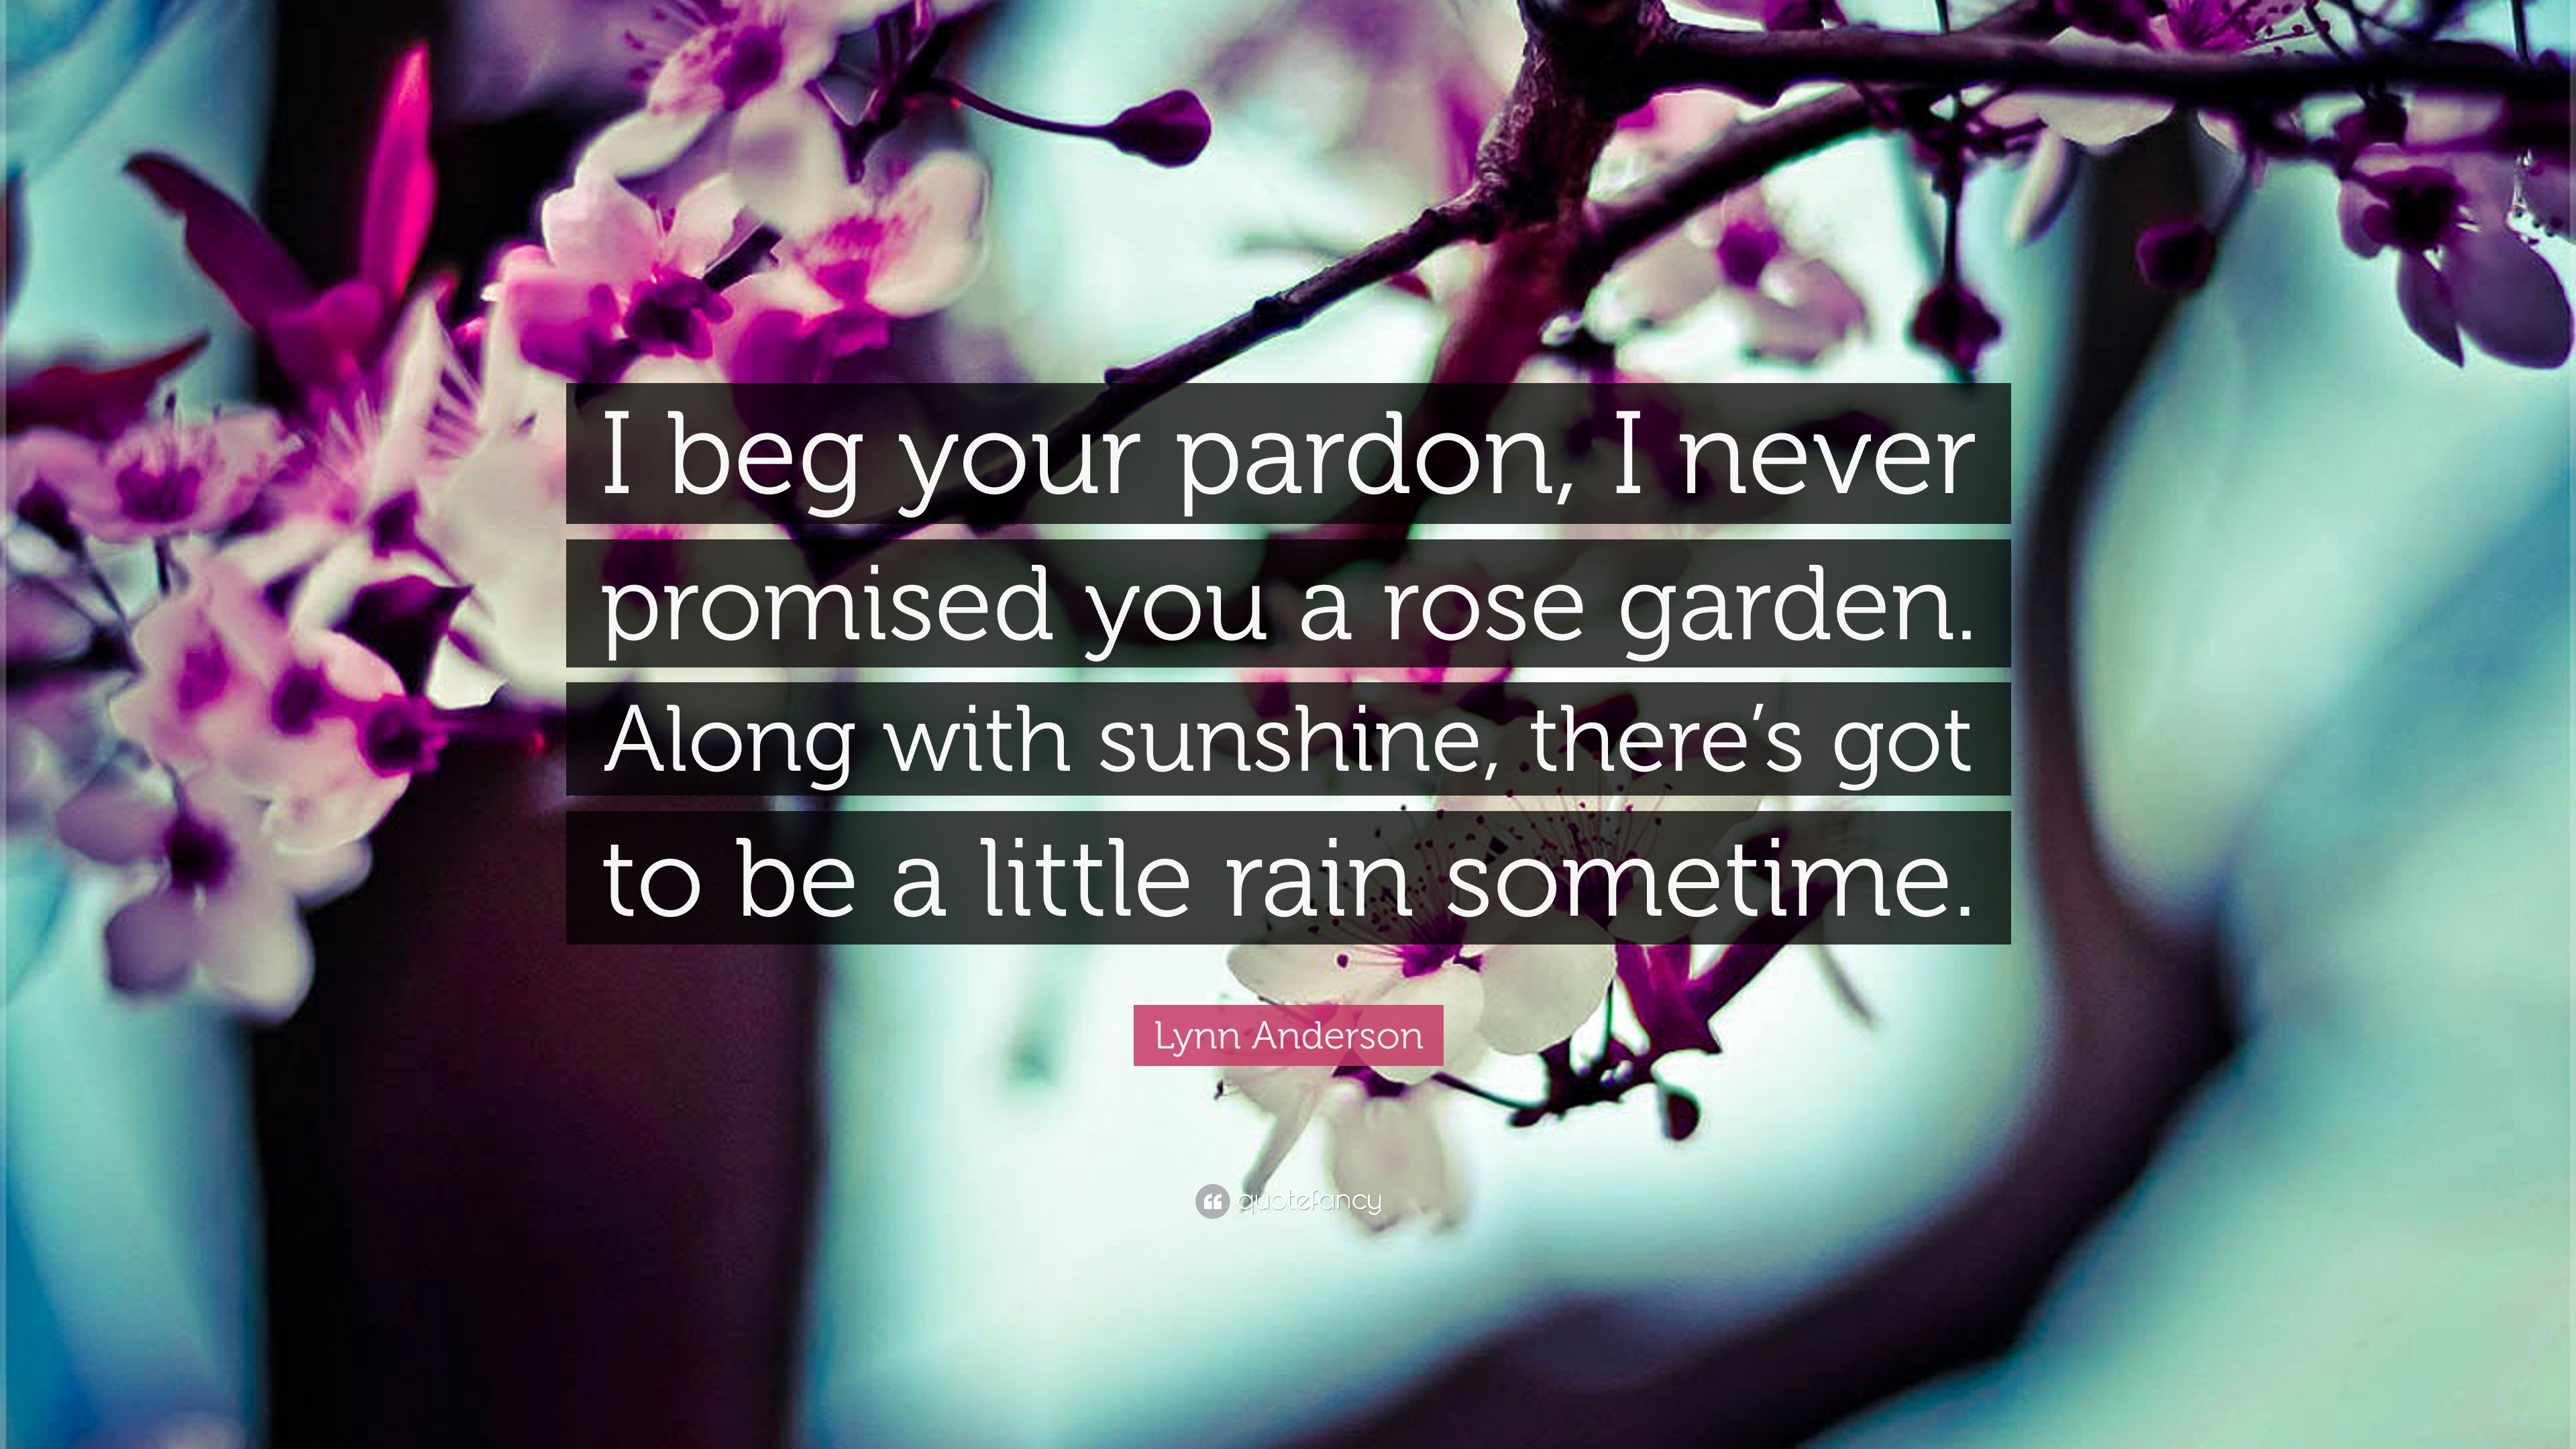 Lynn Anderson Quote I Beg Your Pardon I Never Promised You A